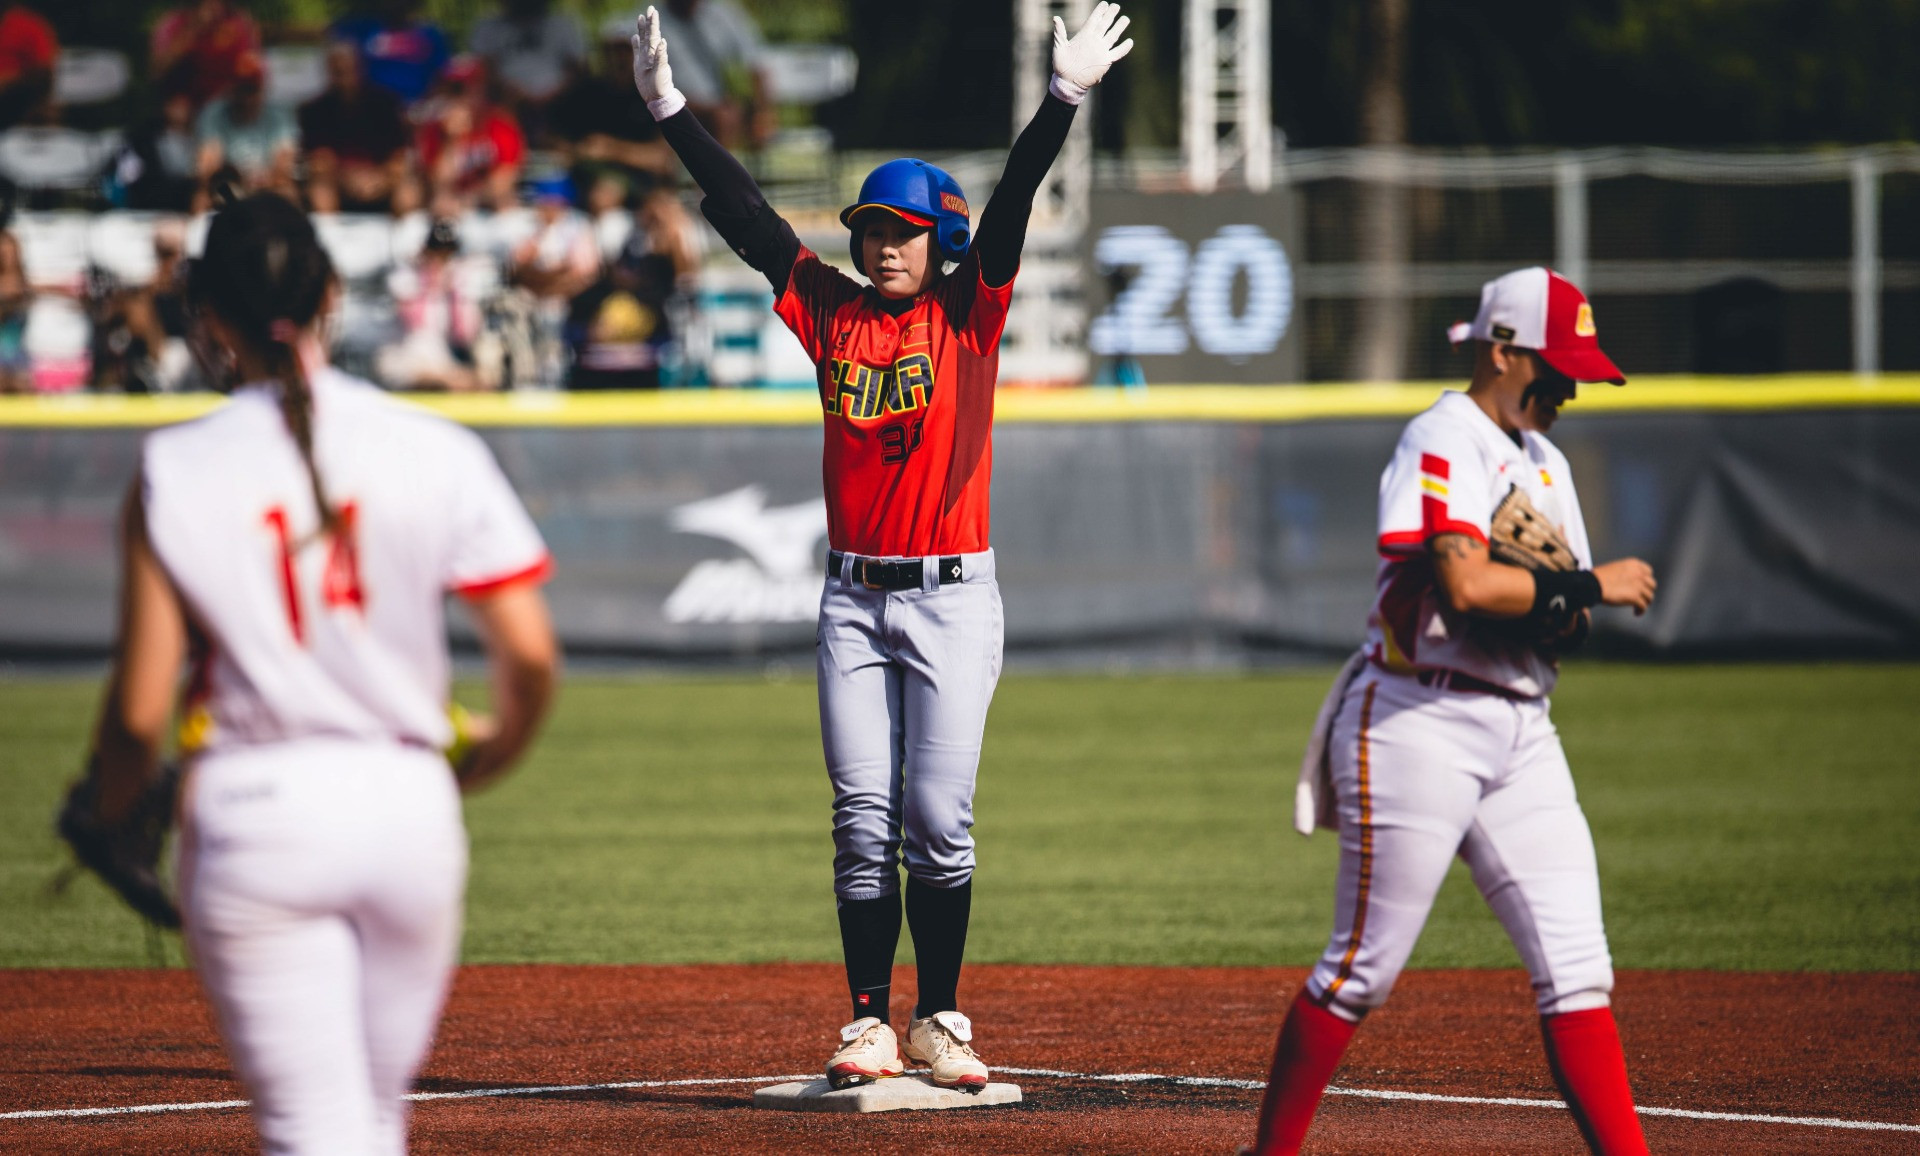 China and Cuba seal Group B playoff places at WBSC Women's Softball World Cup